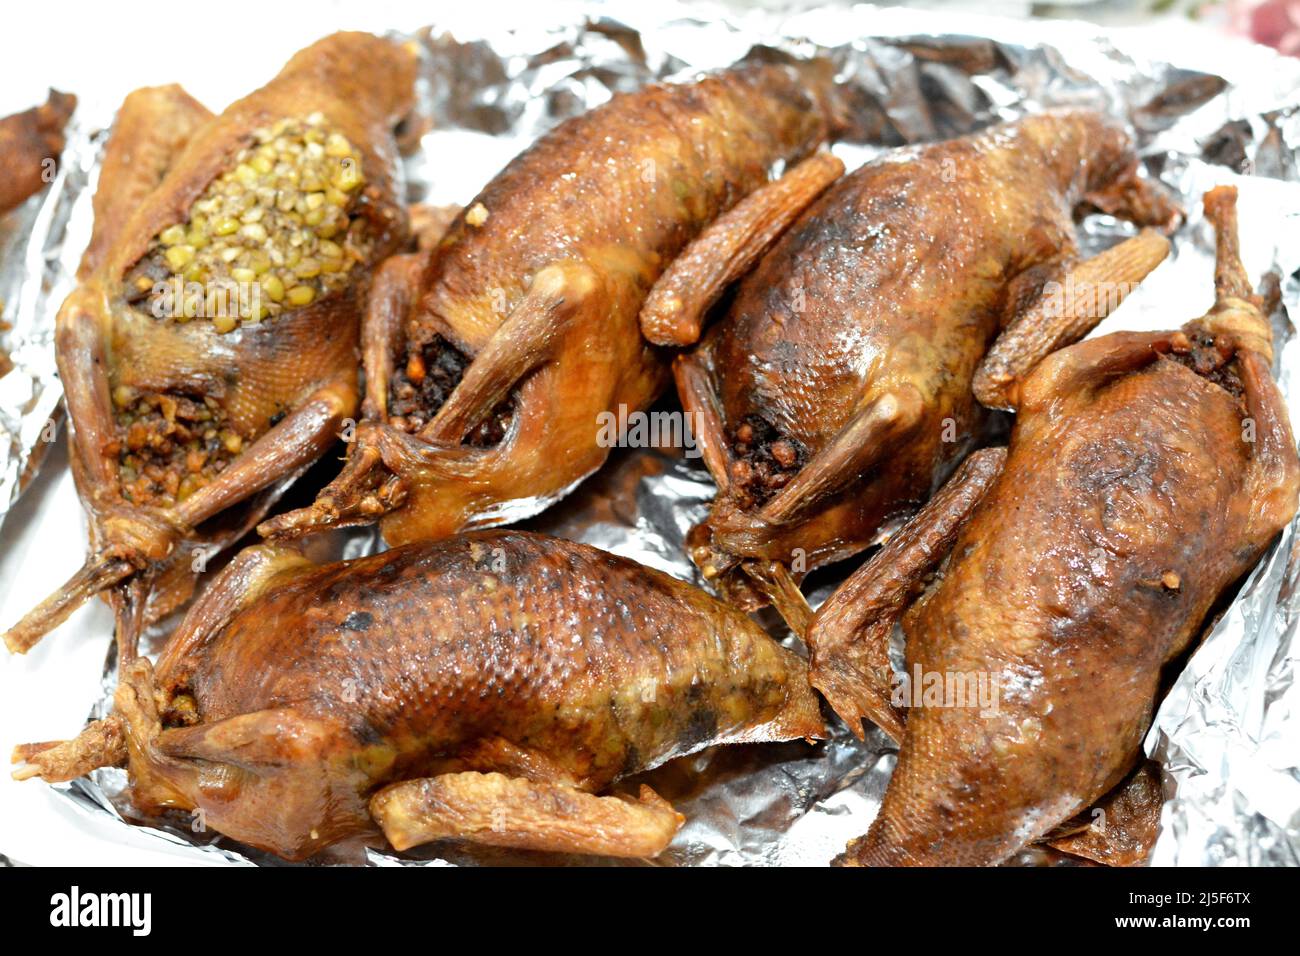 Egyptian Hamam Mahshi or stuffed squab, An Arabic cuisine, Egyptian traditional stuffed pigeon dish filled with rice and Freekeh which is a cracked gr Stock Photo